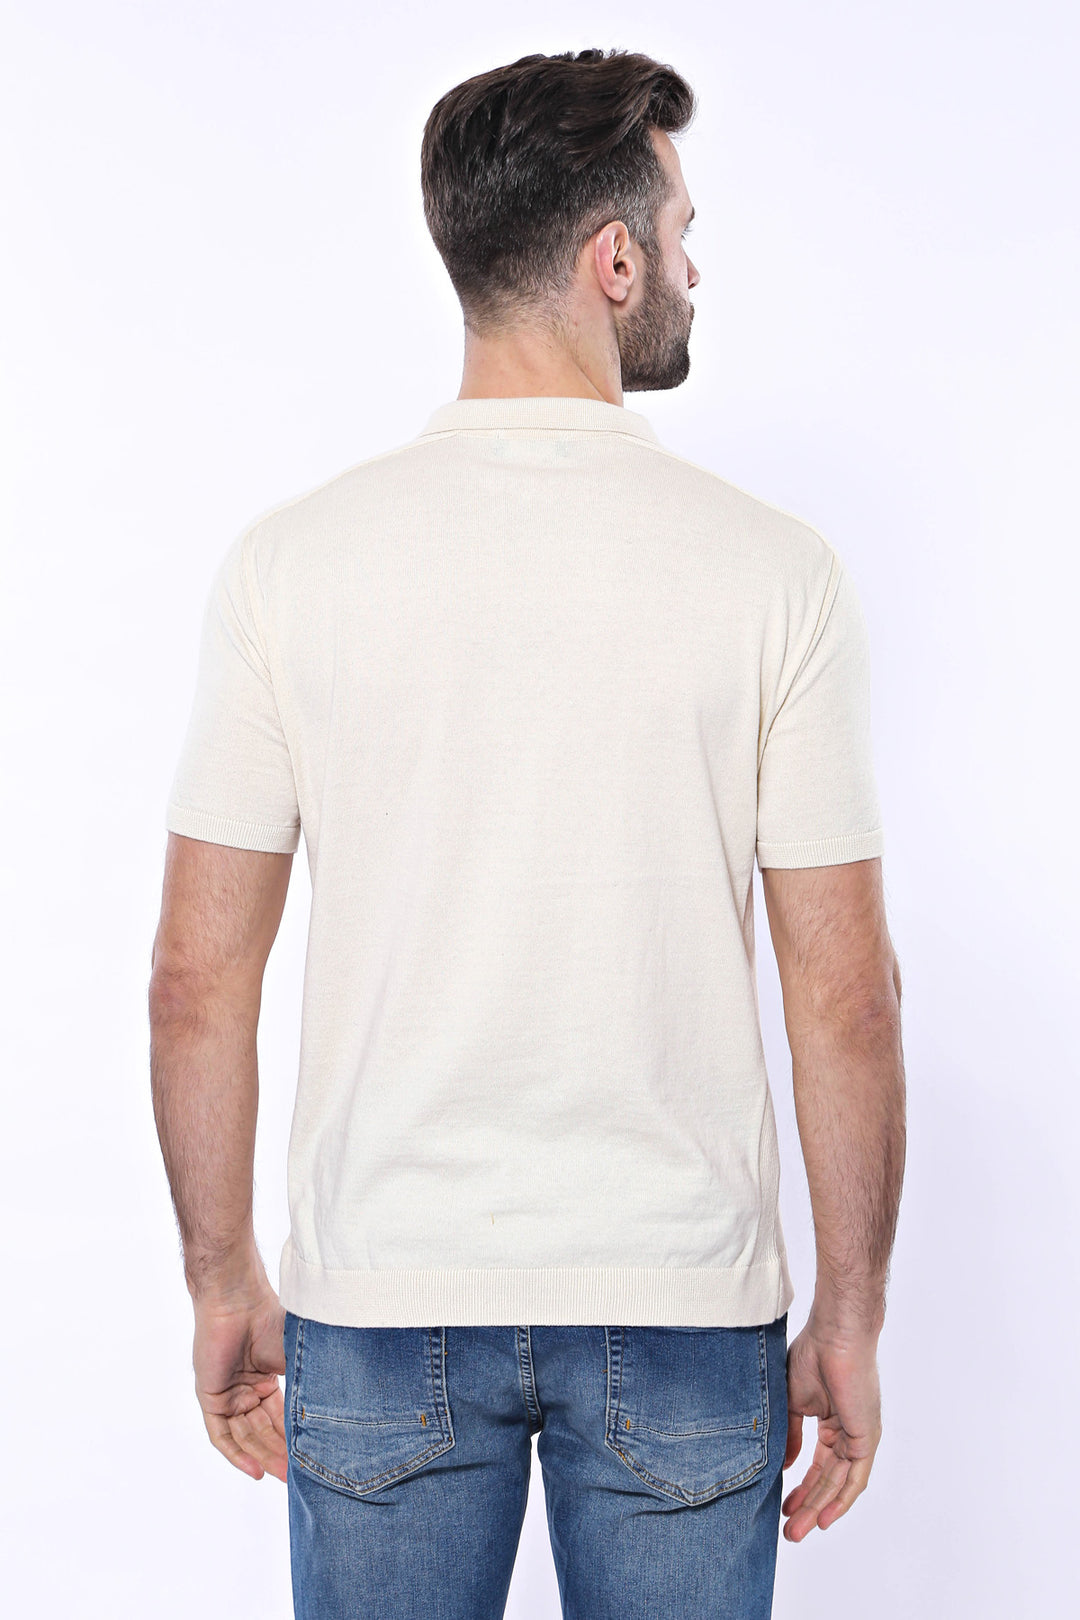 Polo Neck Plain Cream Knitted T-Shirt - Wessi